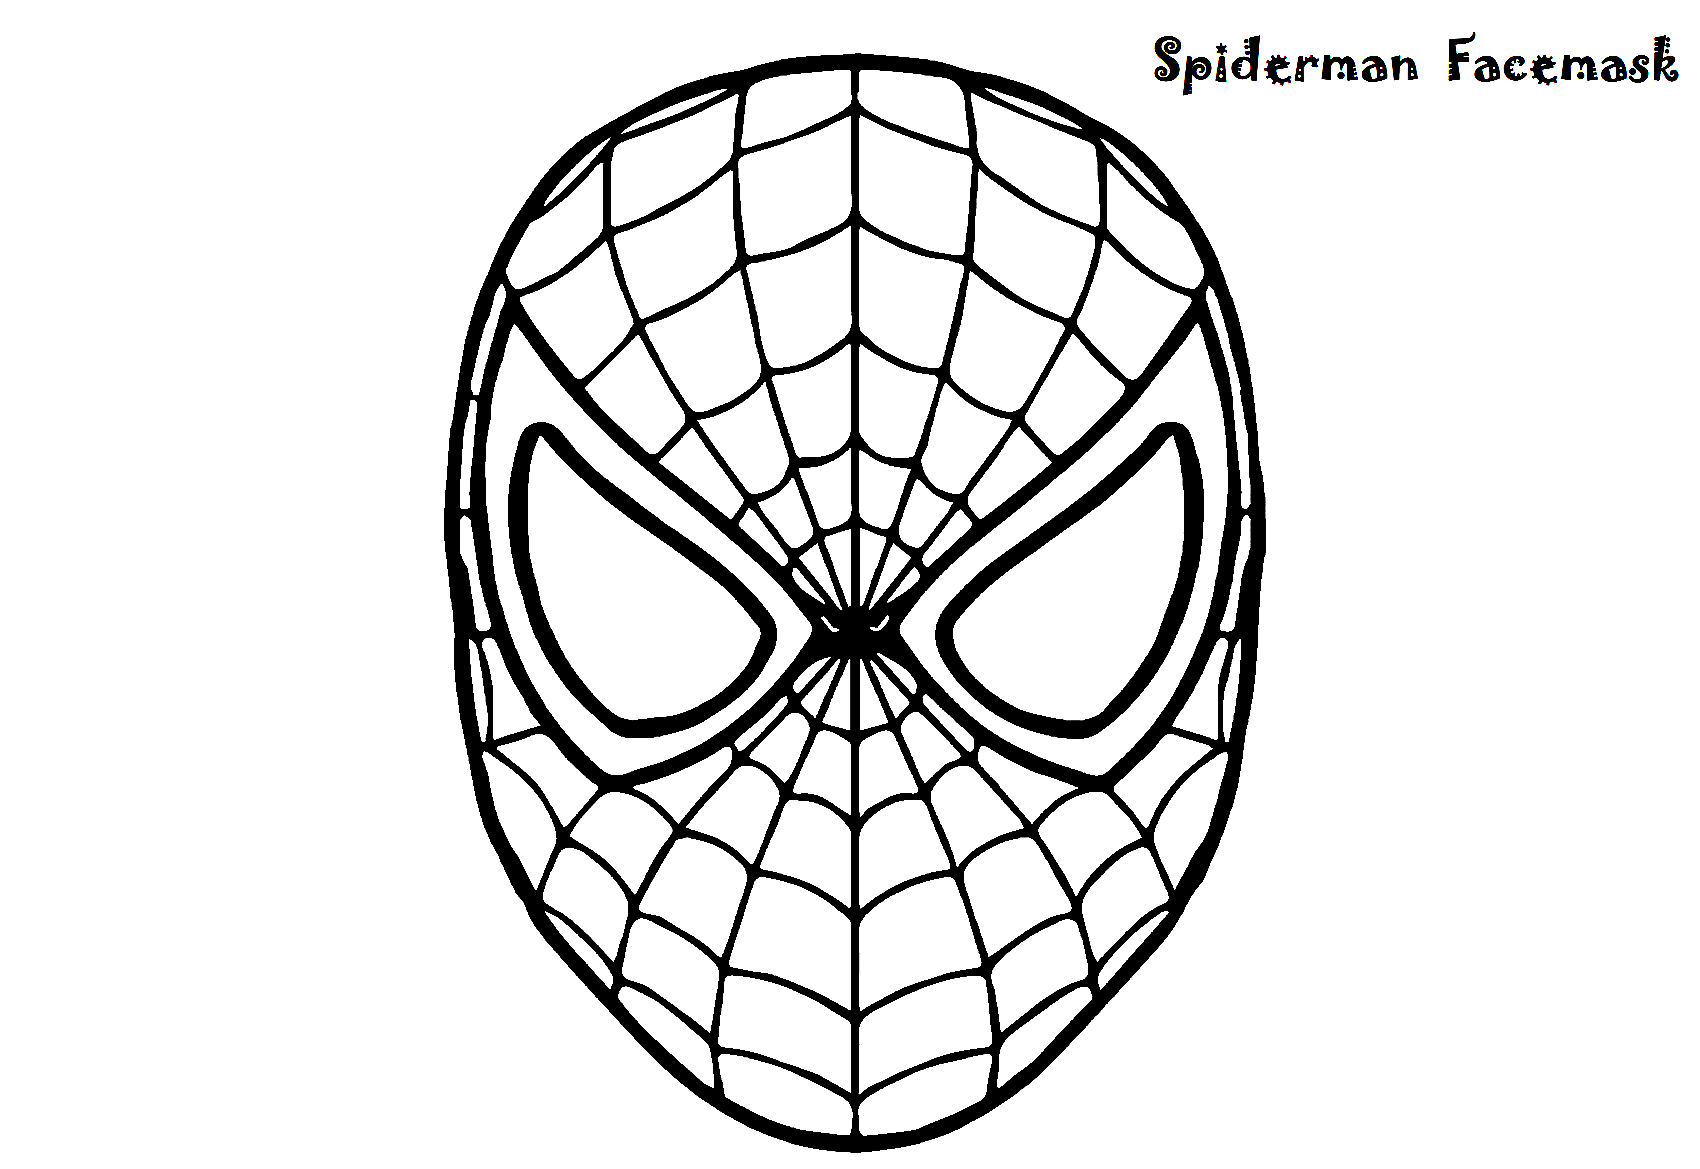 Spiderman Facemask Coloring Page